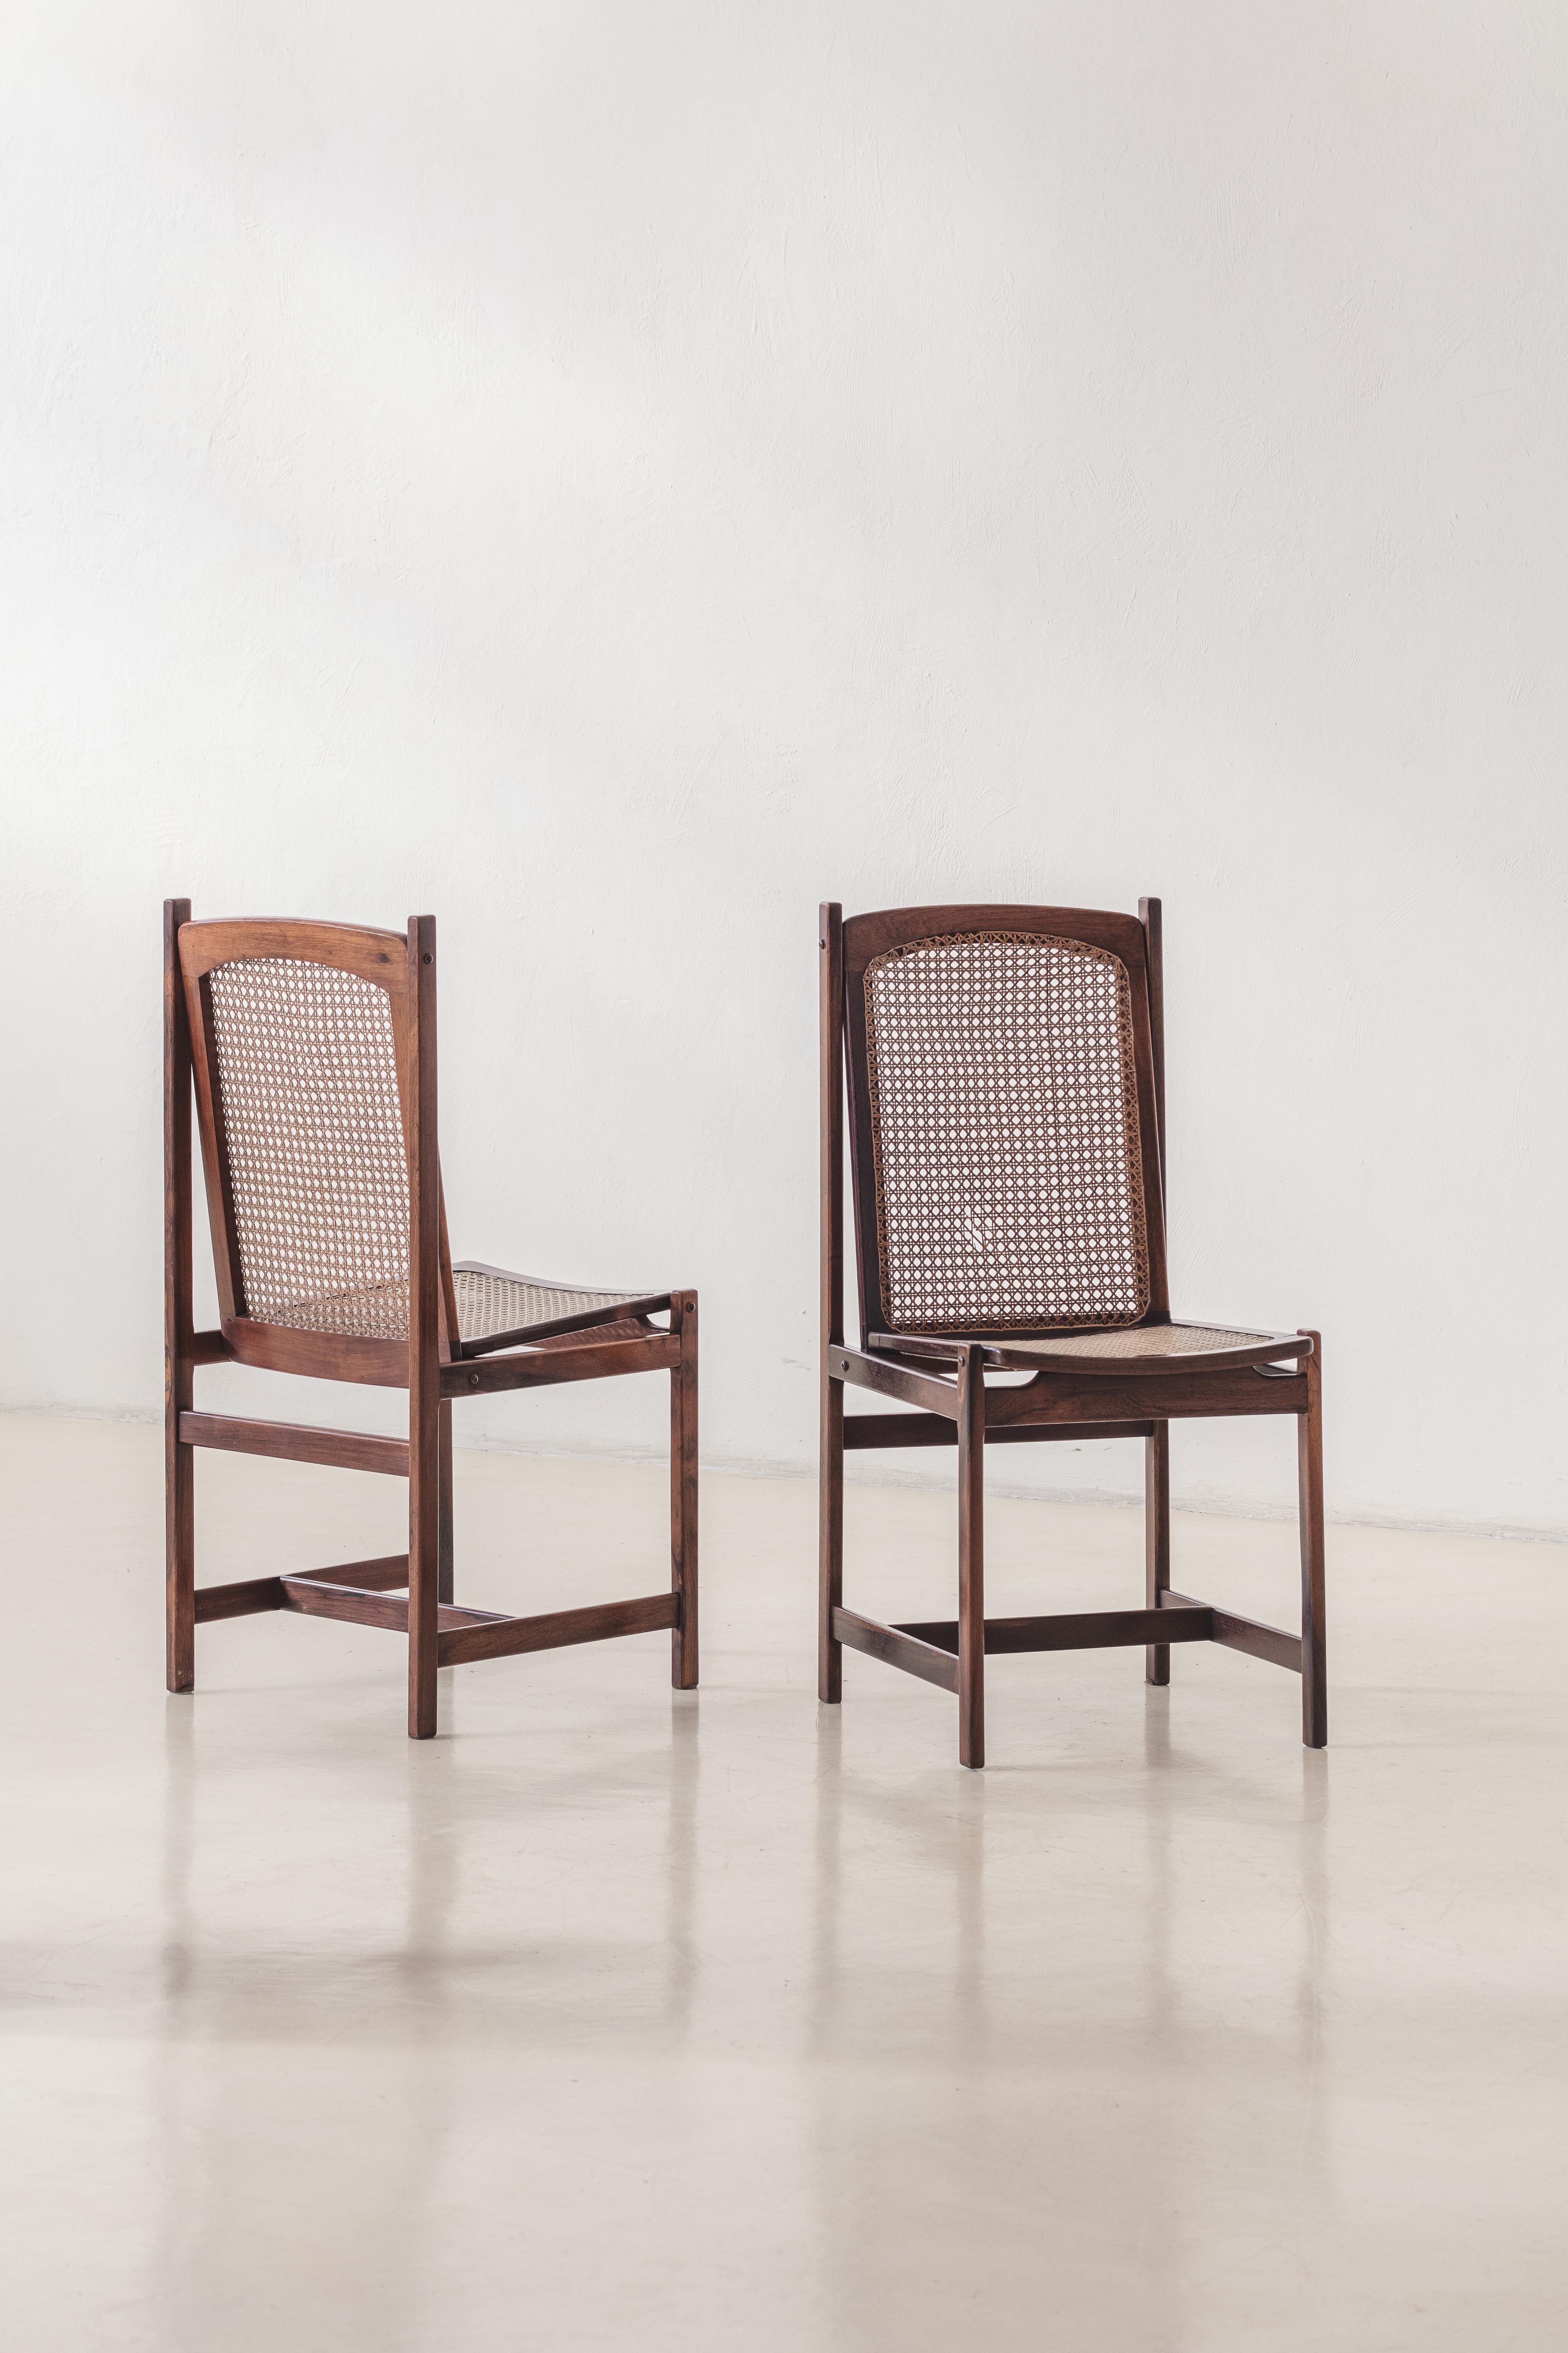 Celina Decorações Set of Six Dining Chairs, Rosewood and Cane, Midcentury 1960s For Sale 2